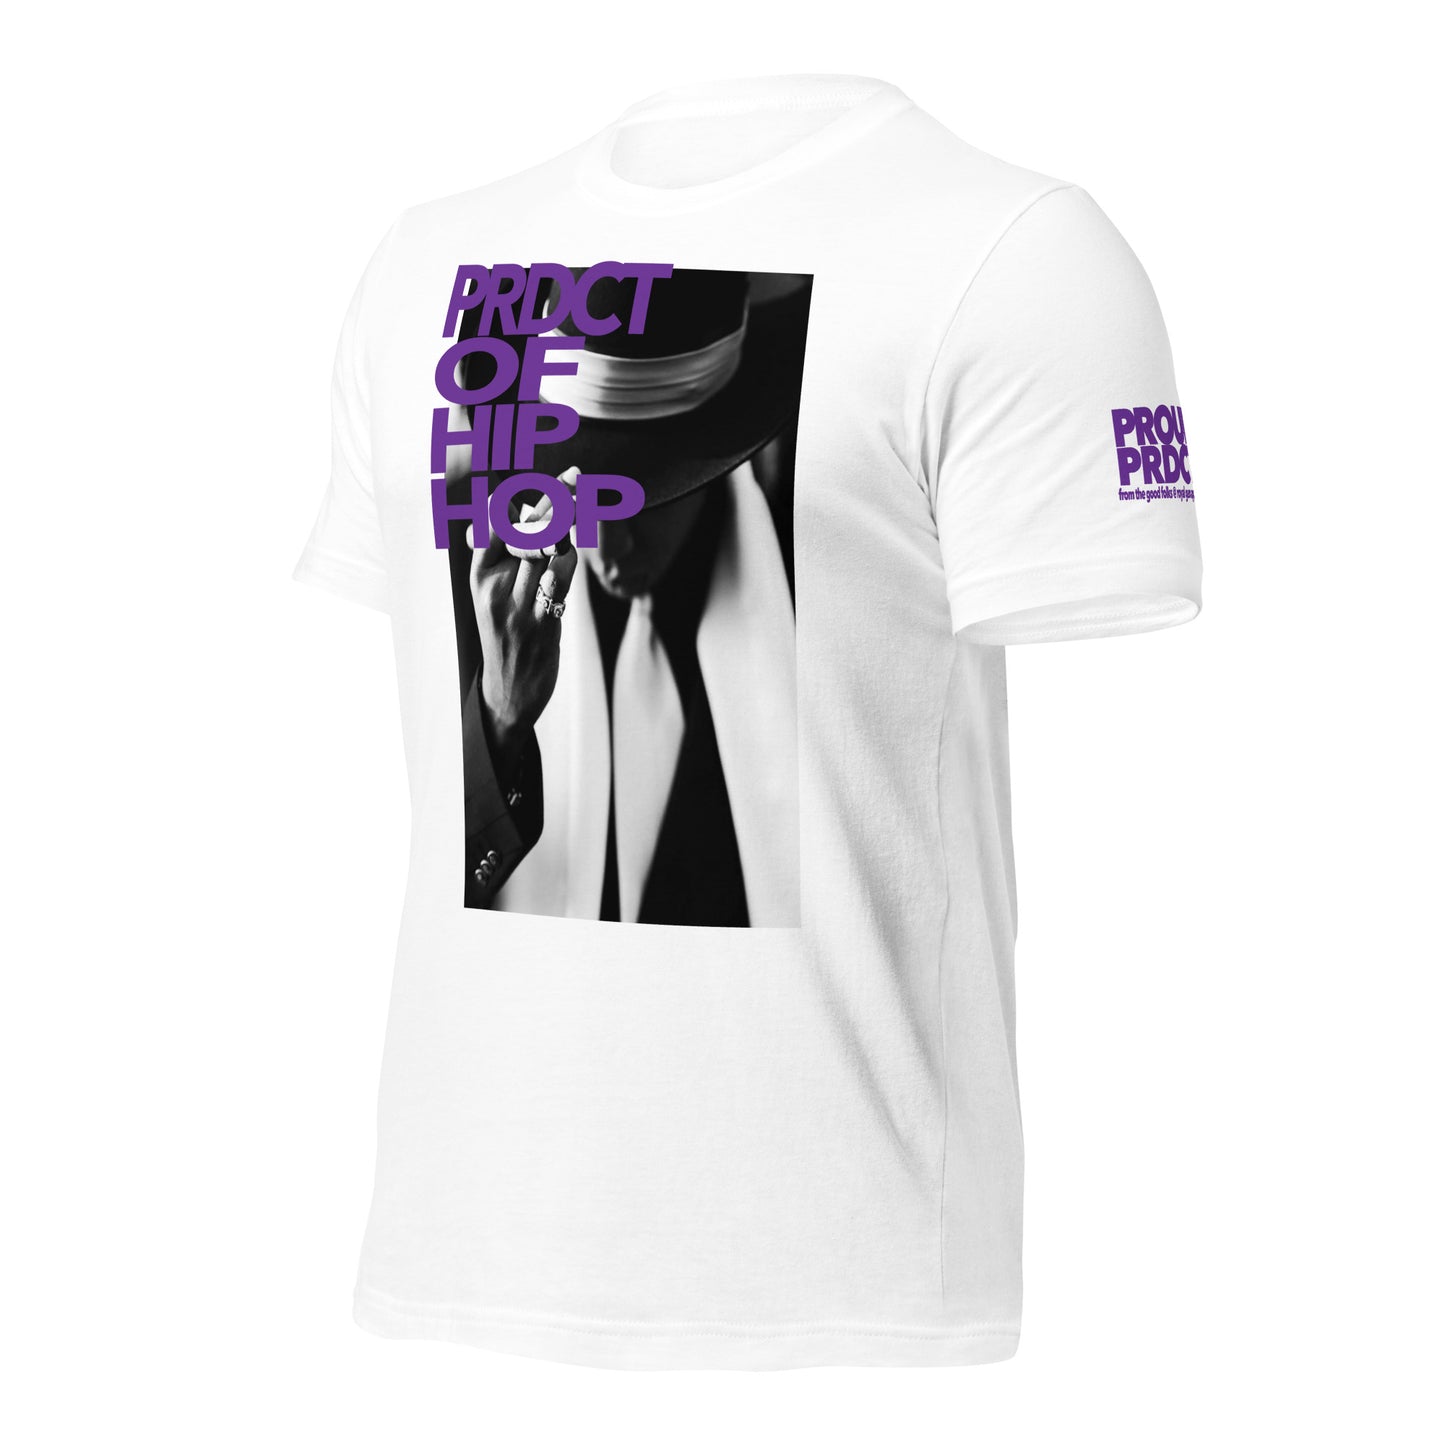 "Product of Hip-Hop" T-Shirt (Limited Edition)